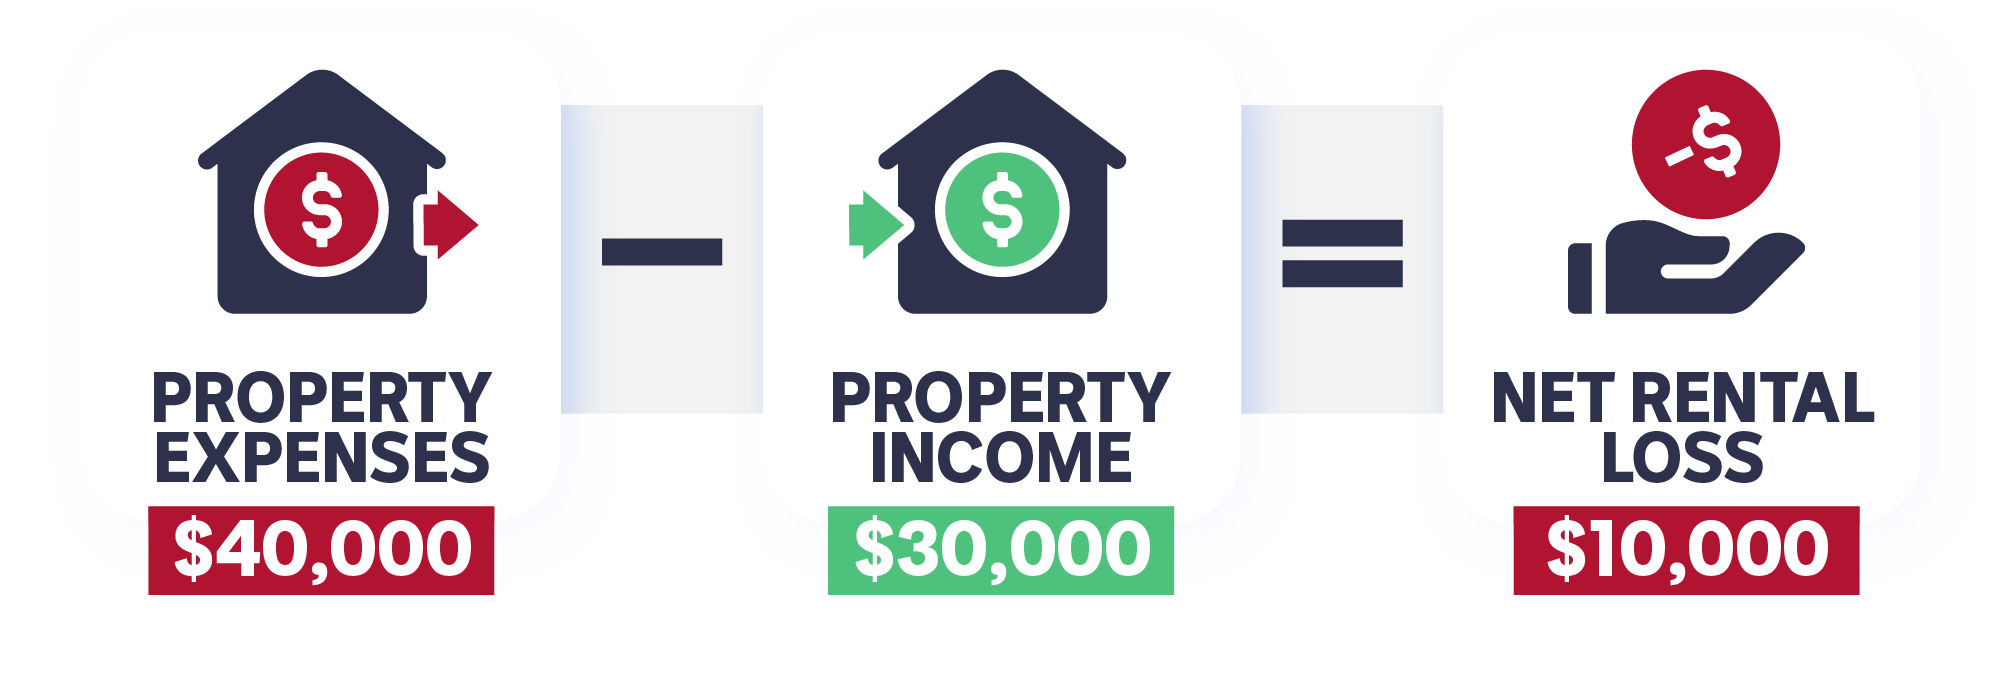 A graphic demonstrating how an investment property expenses can outweigh its earnings, called a rental loss